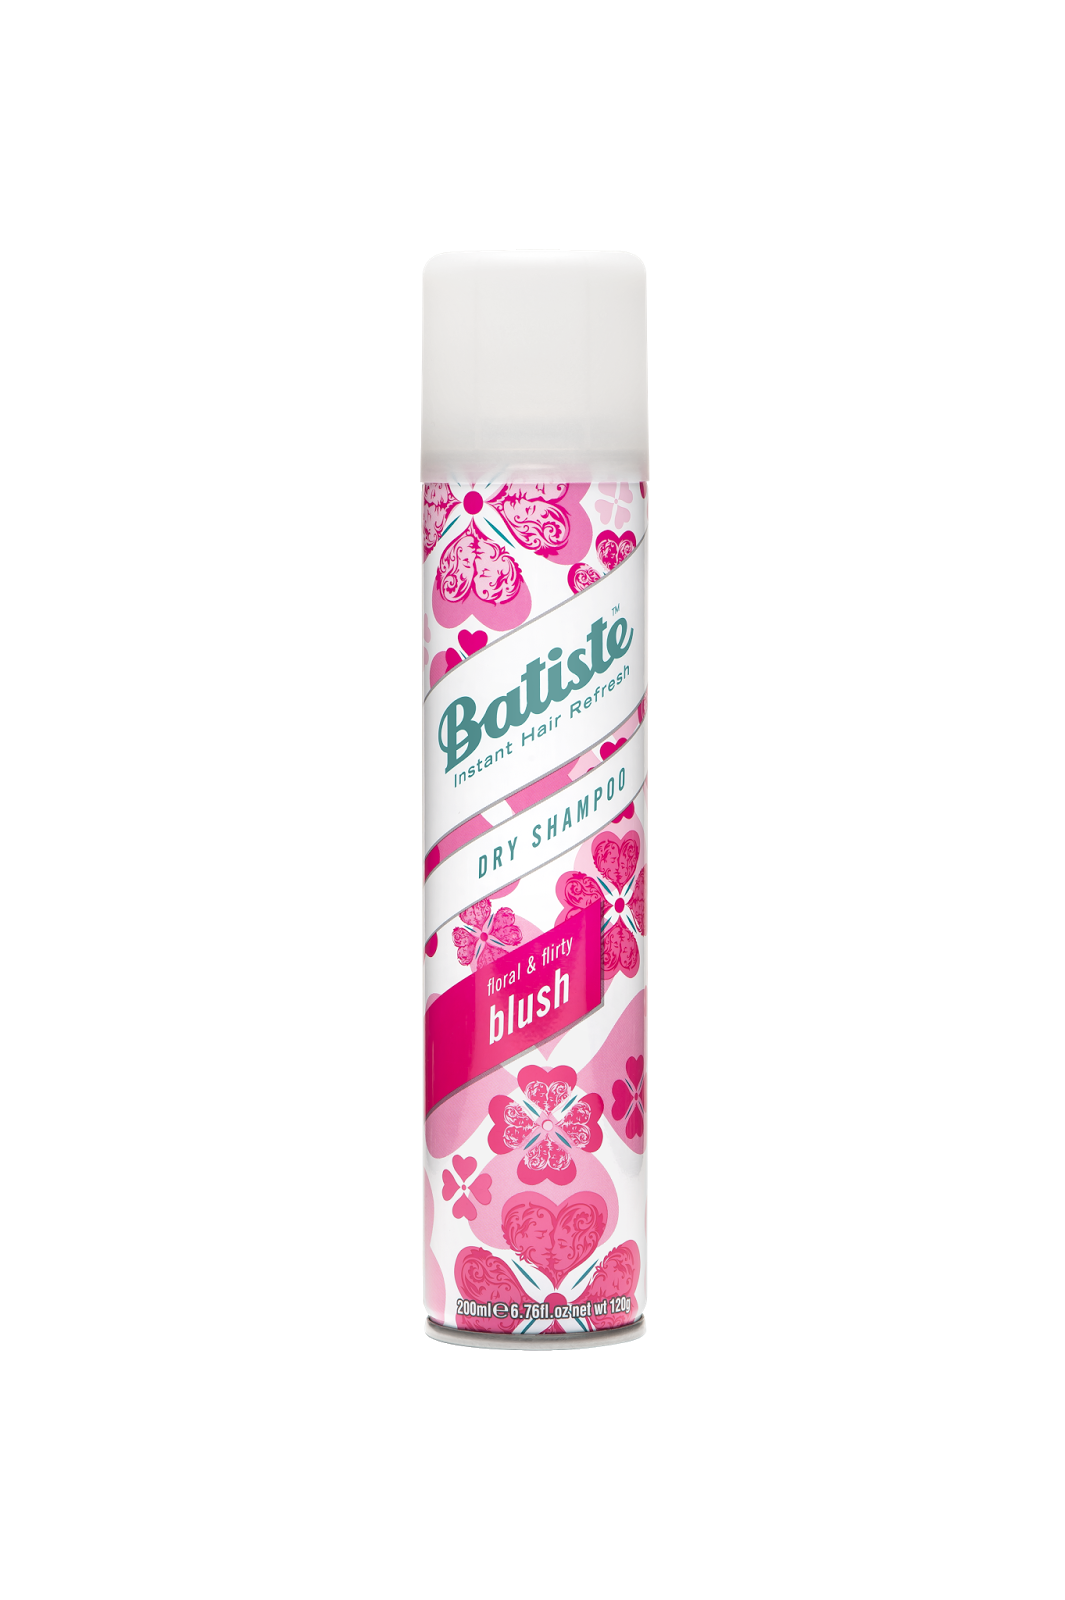 Batiste Dry Shampoo, leaves clean and fresh! by Bowie Cheong